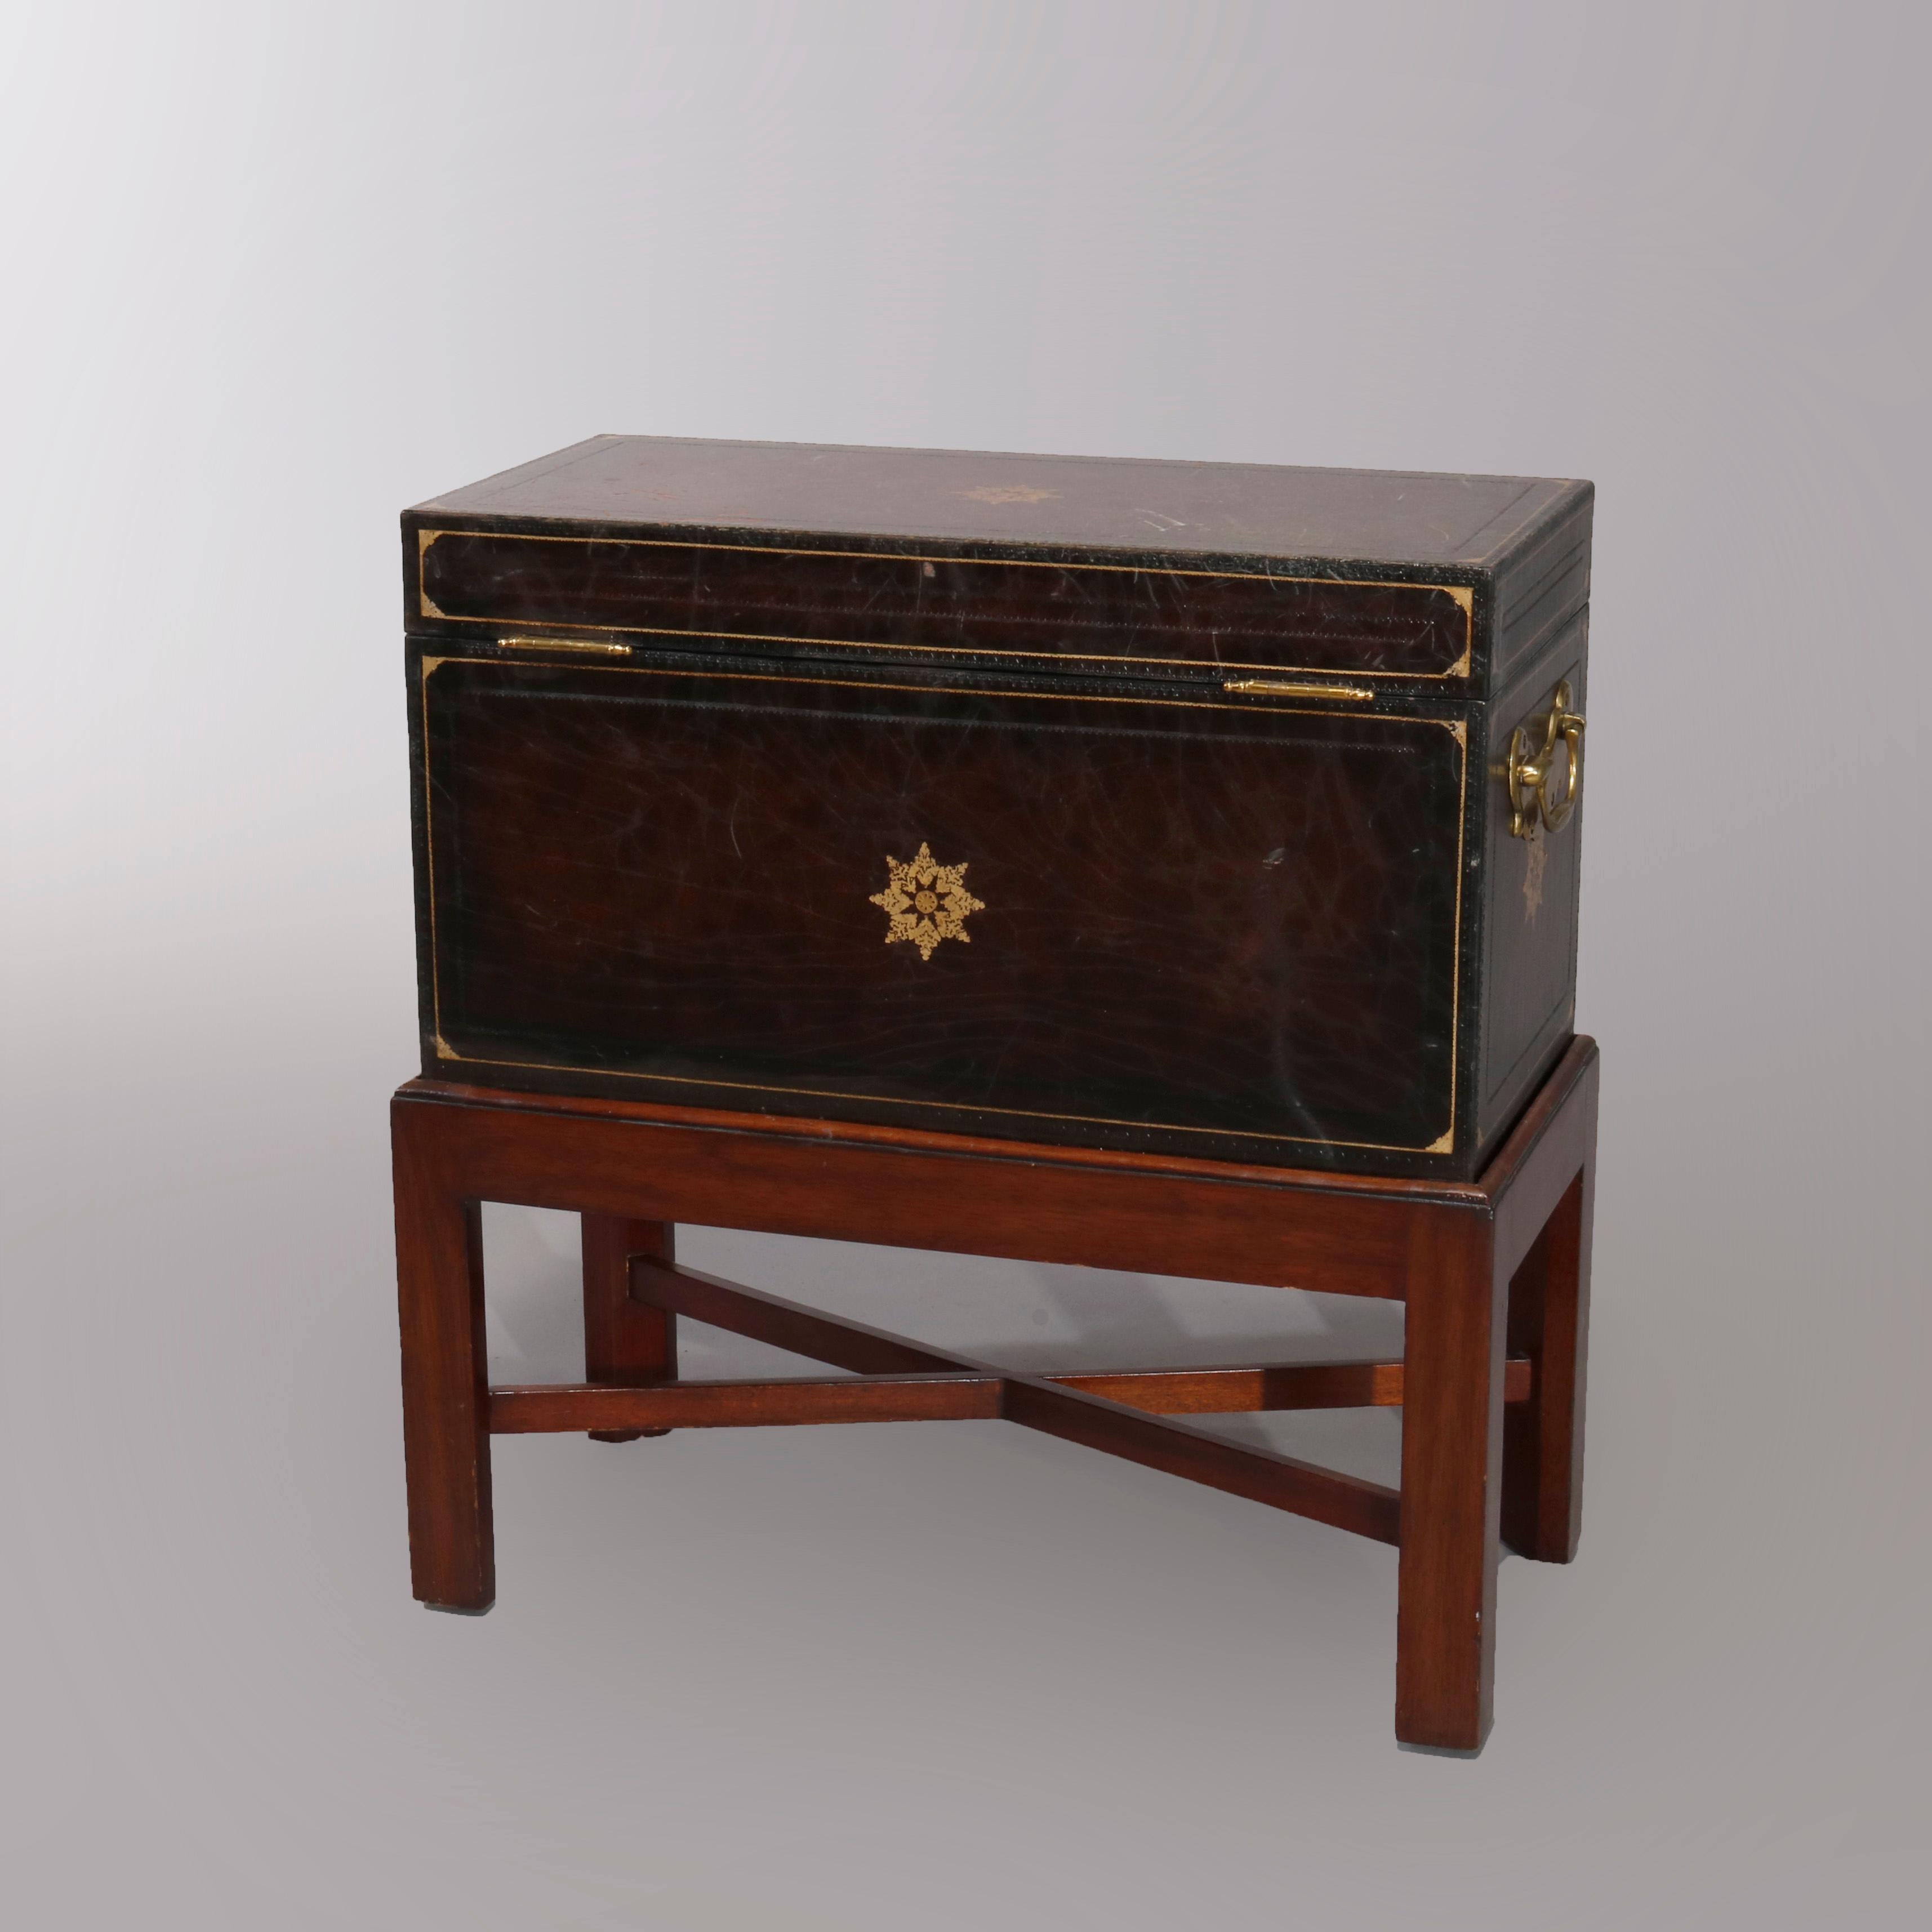 Carved Continental Leather Dowry or Document Box on Mahogany Stand, 20th Century